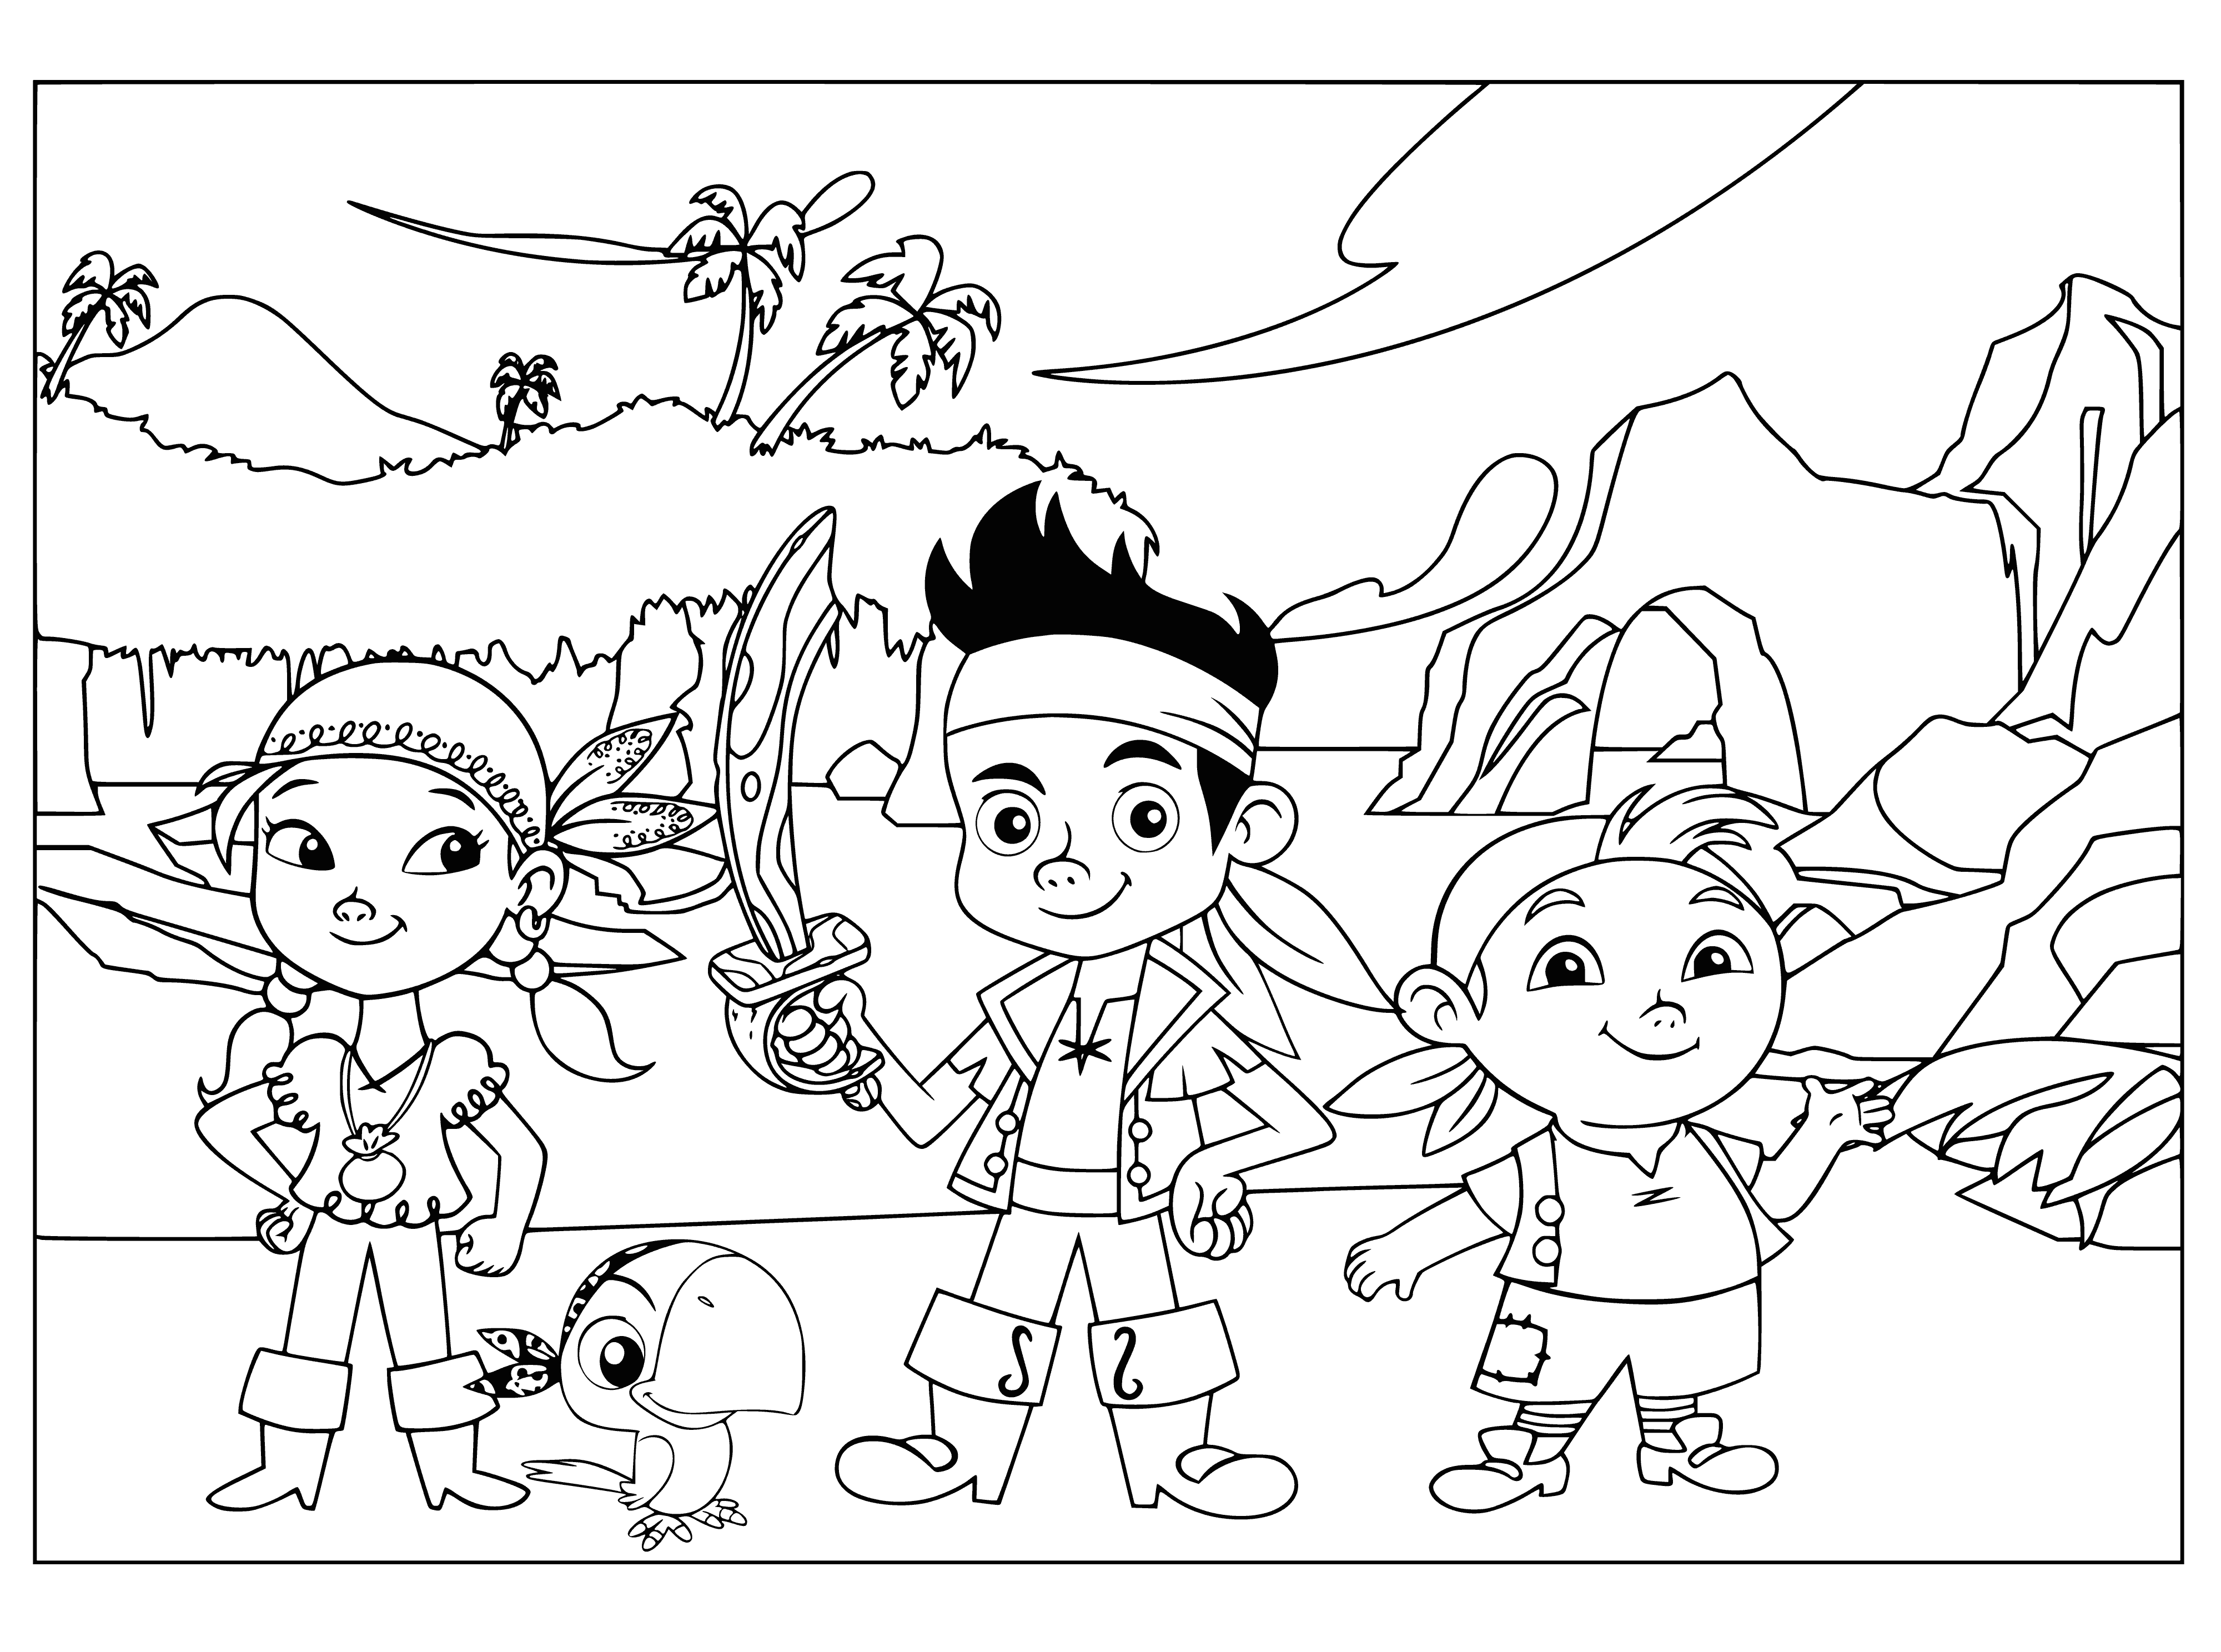 coloring page: Jake and his friends are brave adventurers who love exploring new things. #jakesneverlandpirates